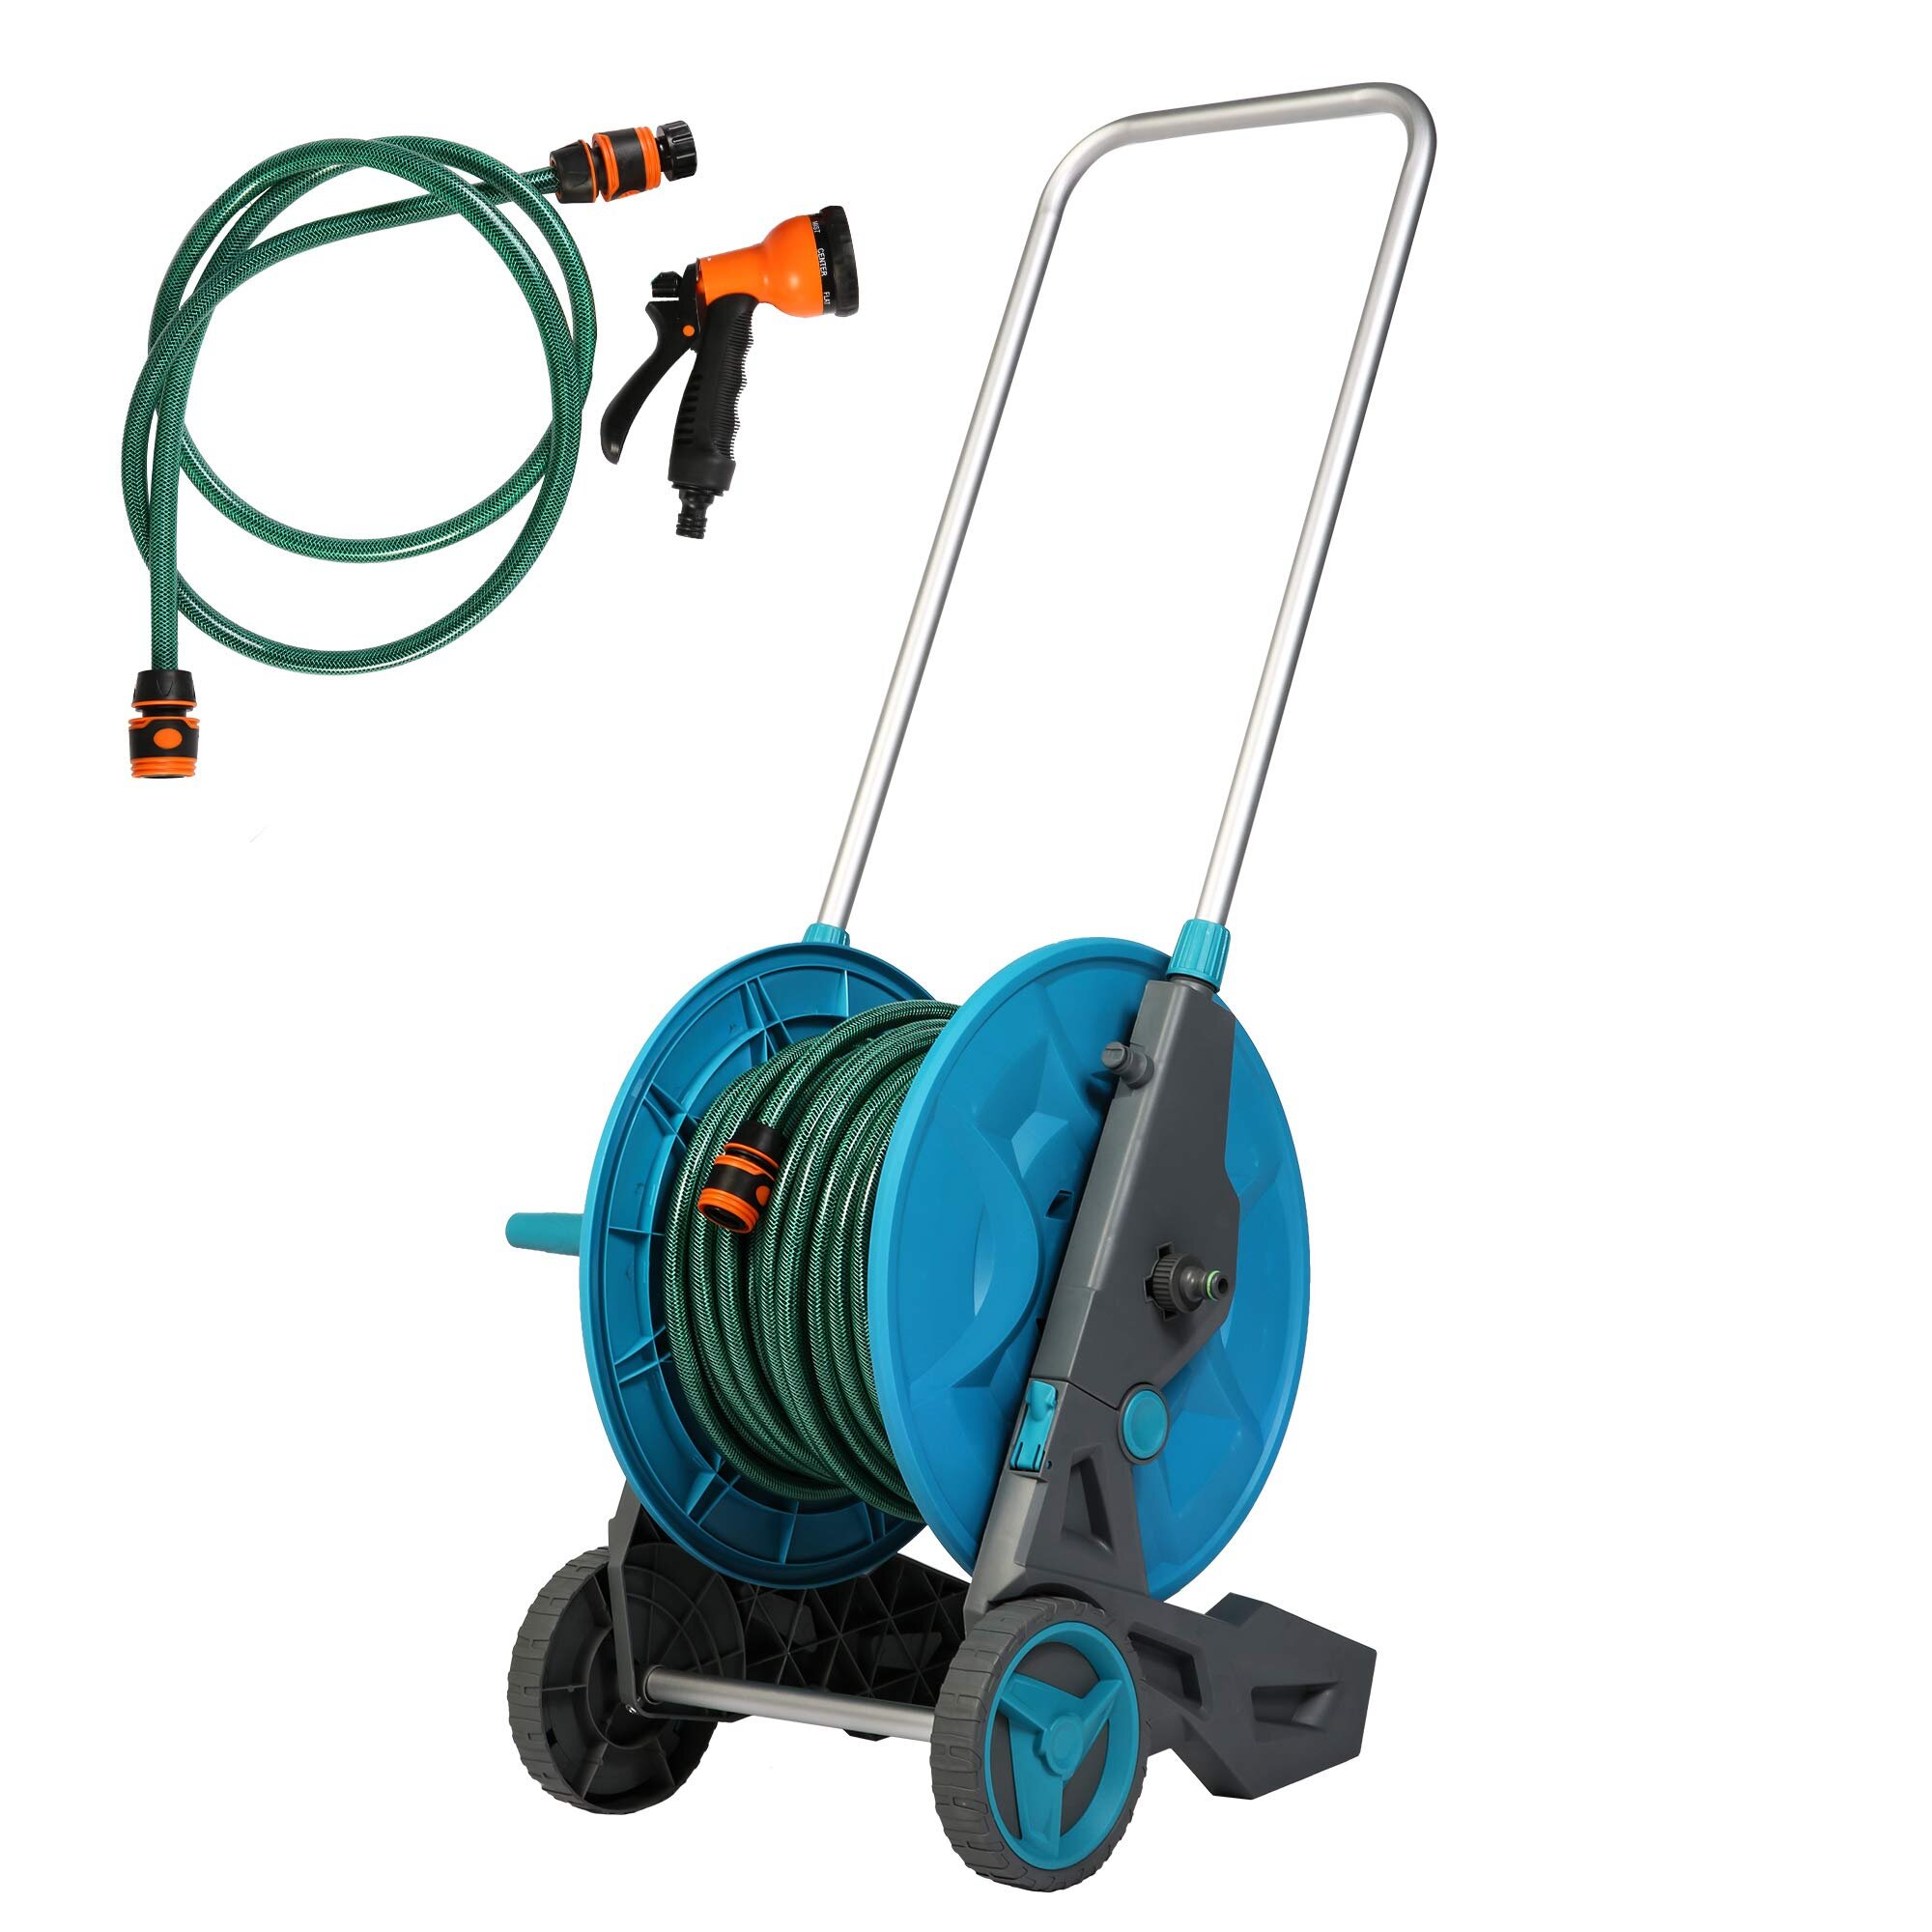 New Simple Hose Reel Tool Cart for Garden Using - China Hose Reel Cart and  Hose Reel Carts price